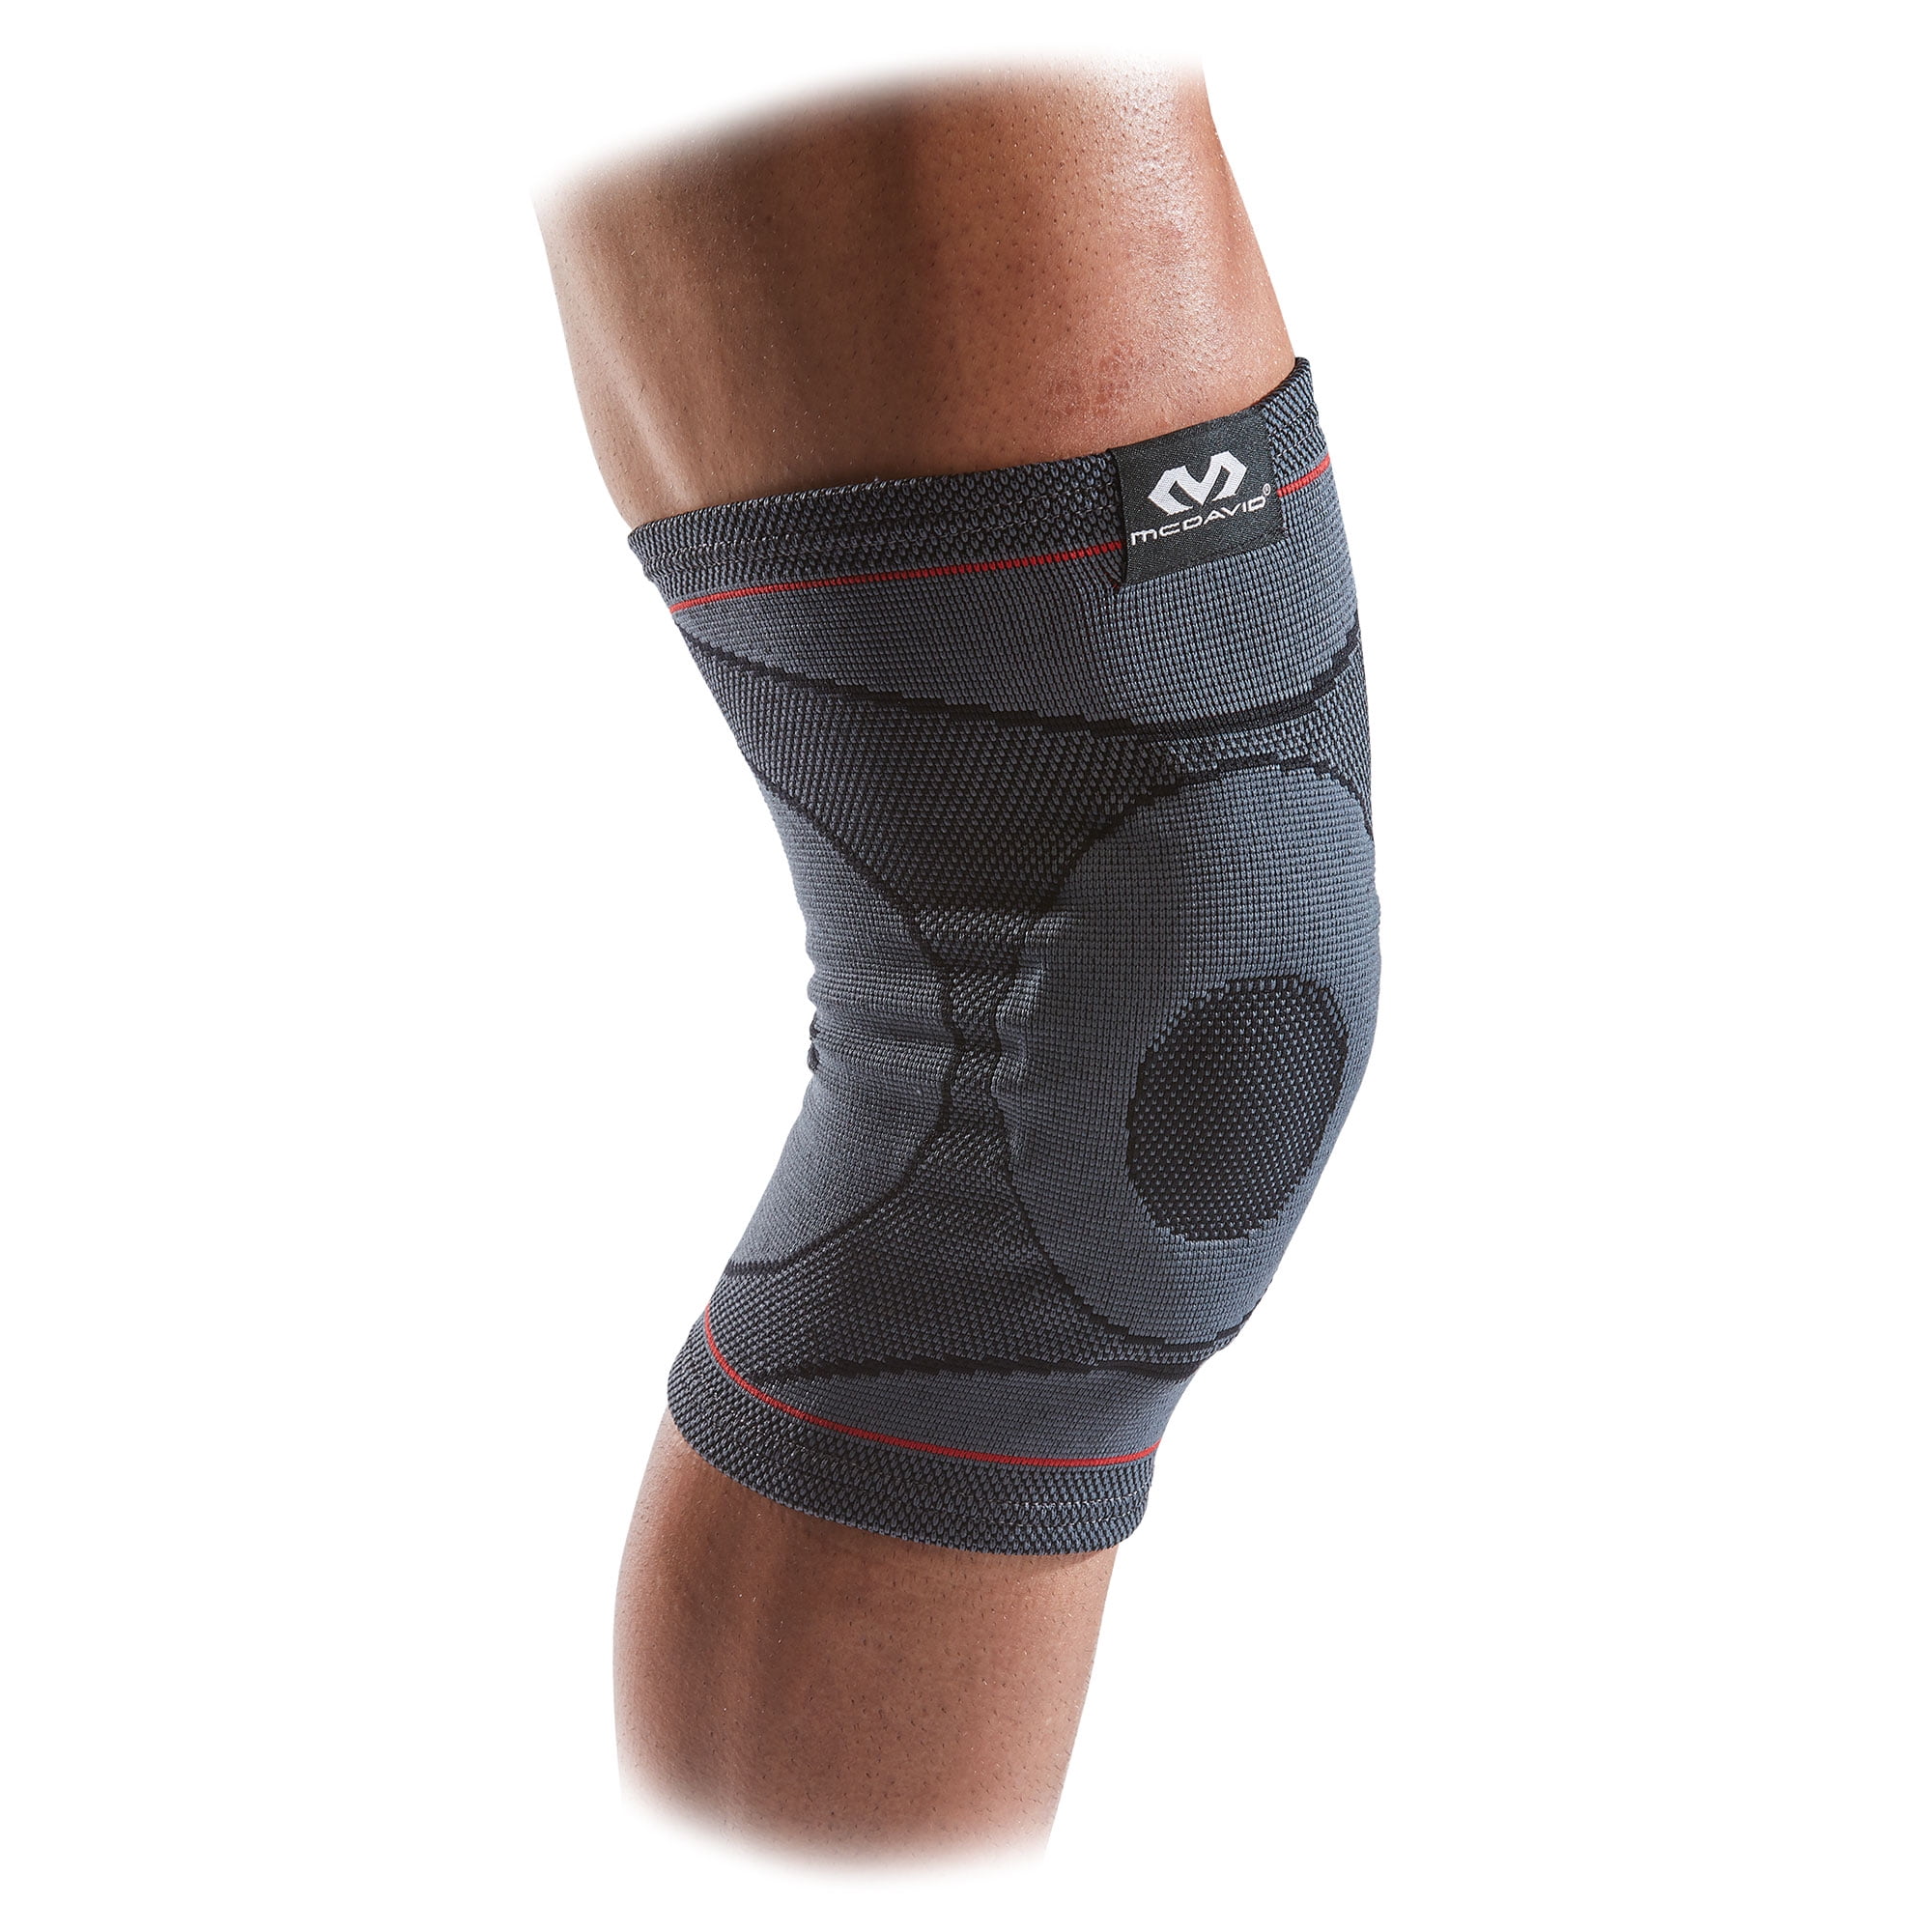 Copper Compression Knee Brace - Heavy Duty W/ Extra Support